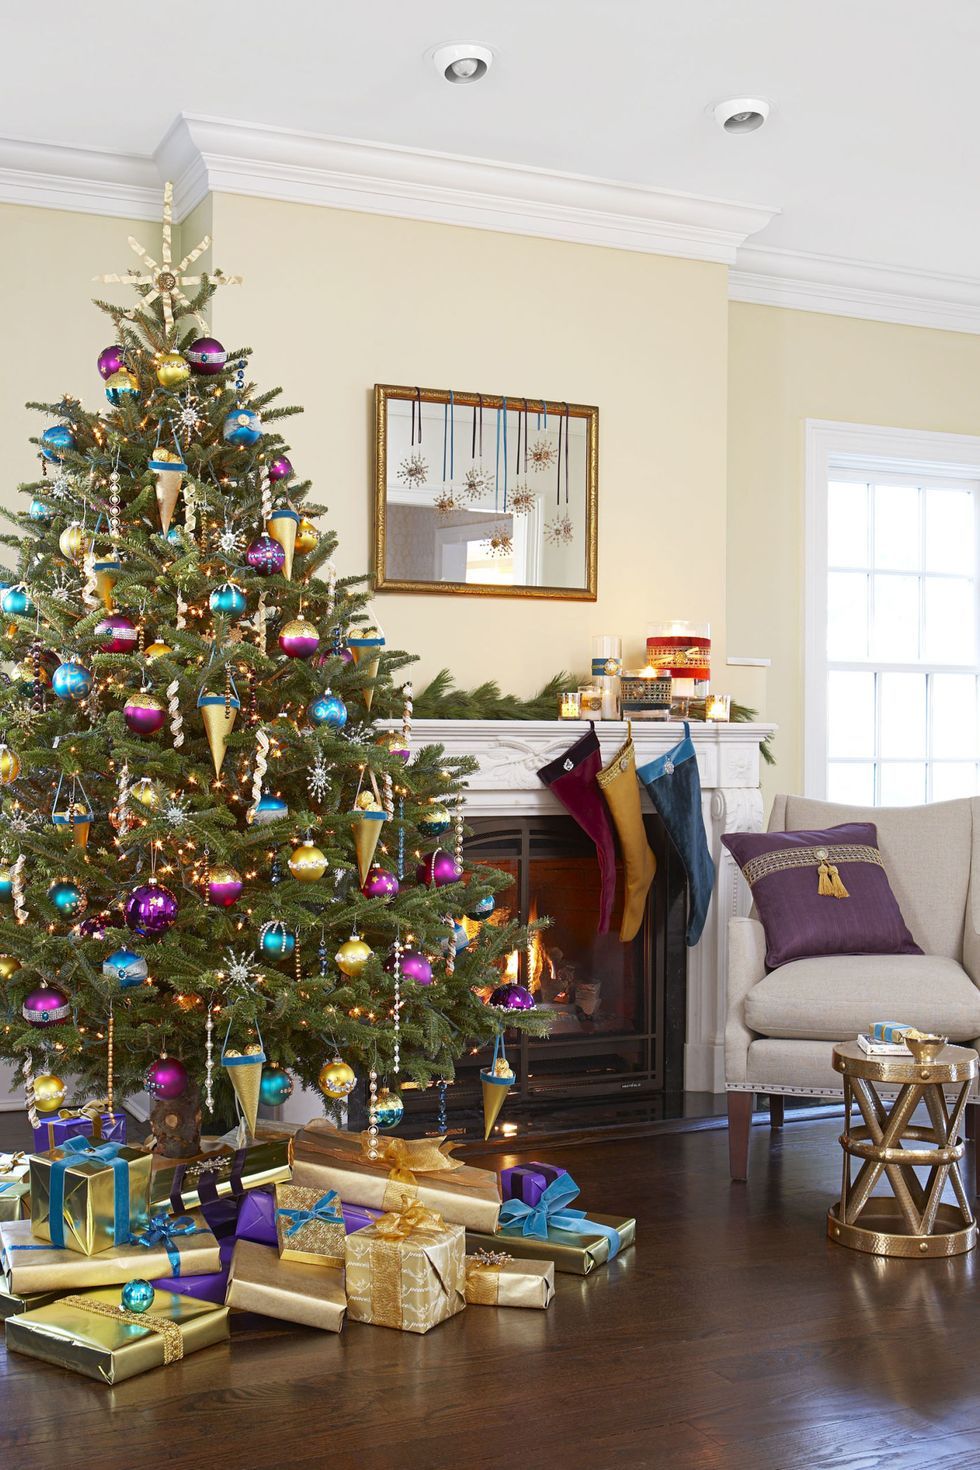 18 Pretty Purple Christmas Decorations - Best Purple Ornaments and Wreaths